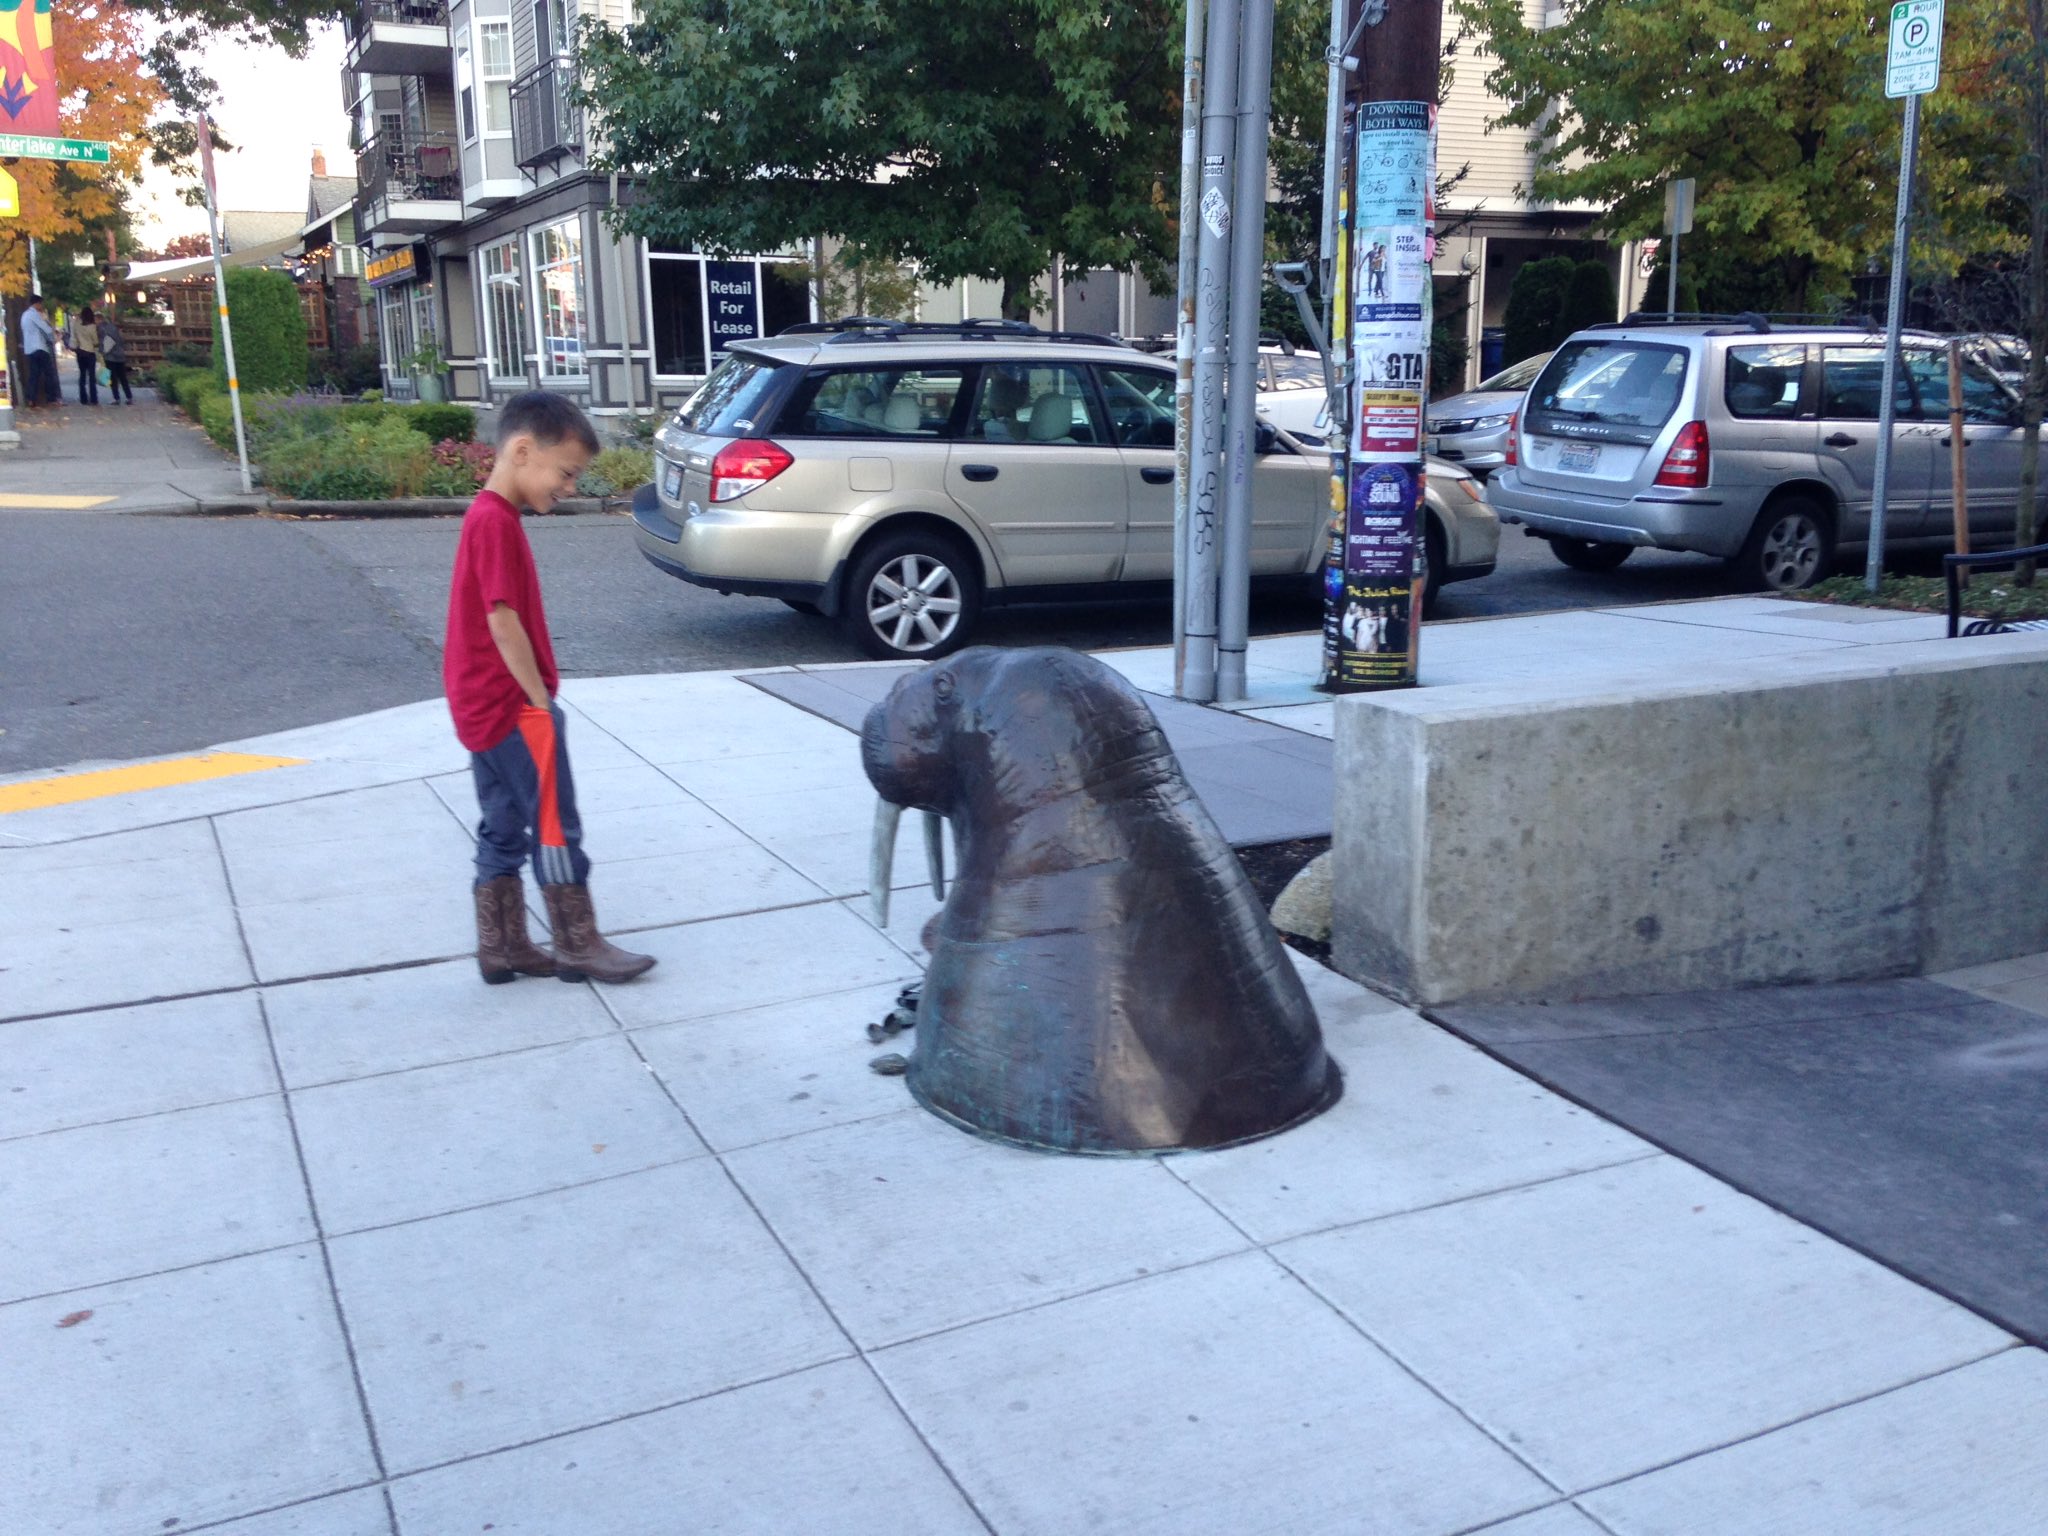 Child looks at walrus sculpture outside of Smith & Burns in Wallingford